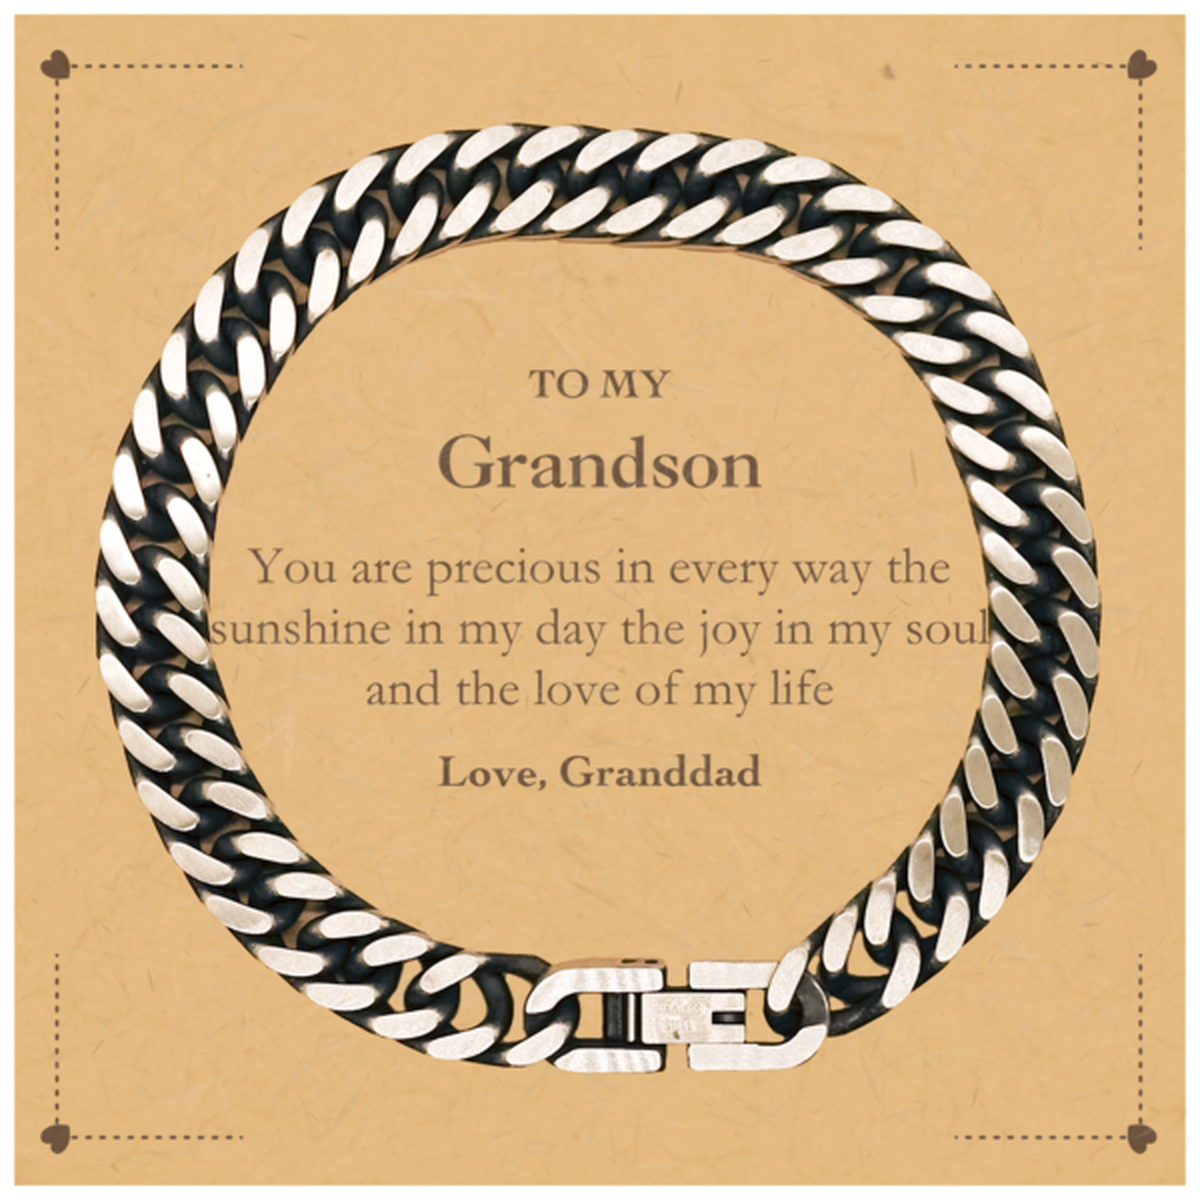 Graduation Gifts for Grandson Cuban Link Chain Bracelet Present from Granddad, Christmas Grandson Birthday Gifts Grandson You are precious in every way the sunshine in my day. Love, Granddad